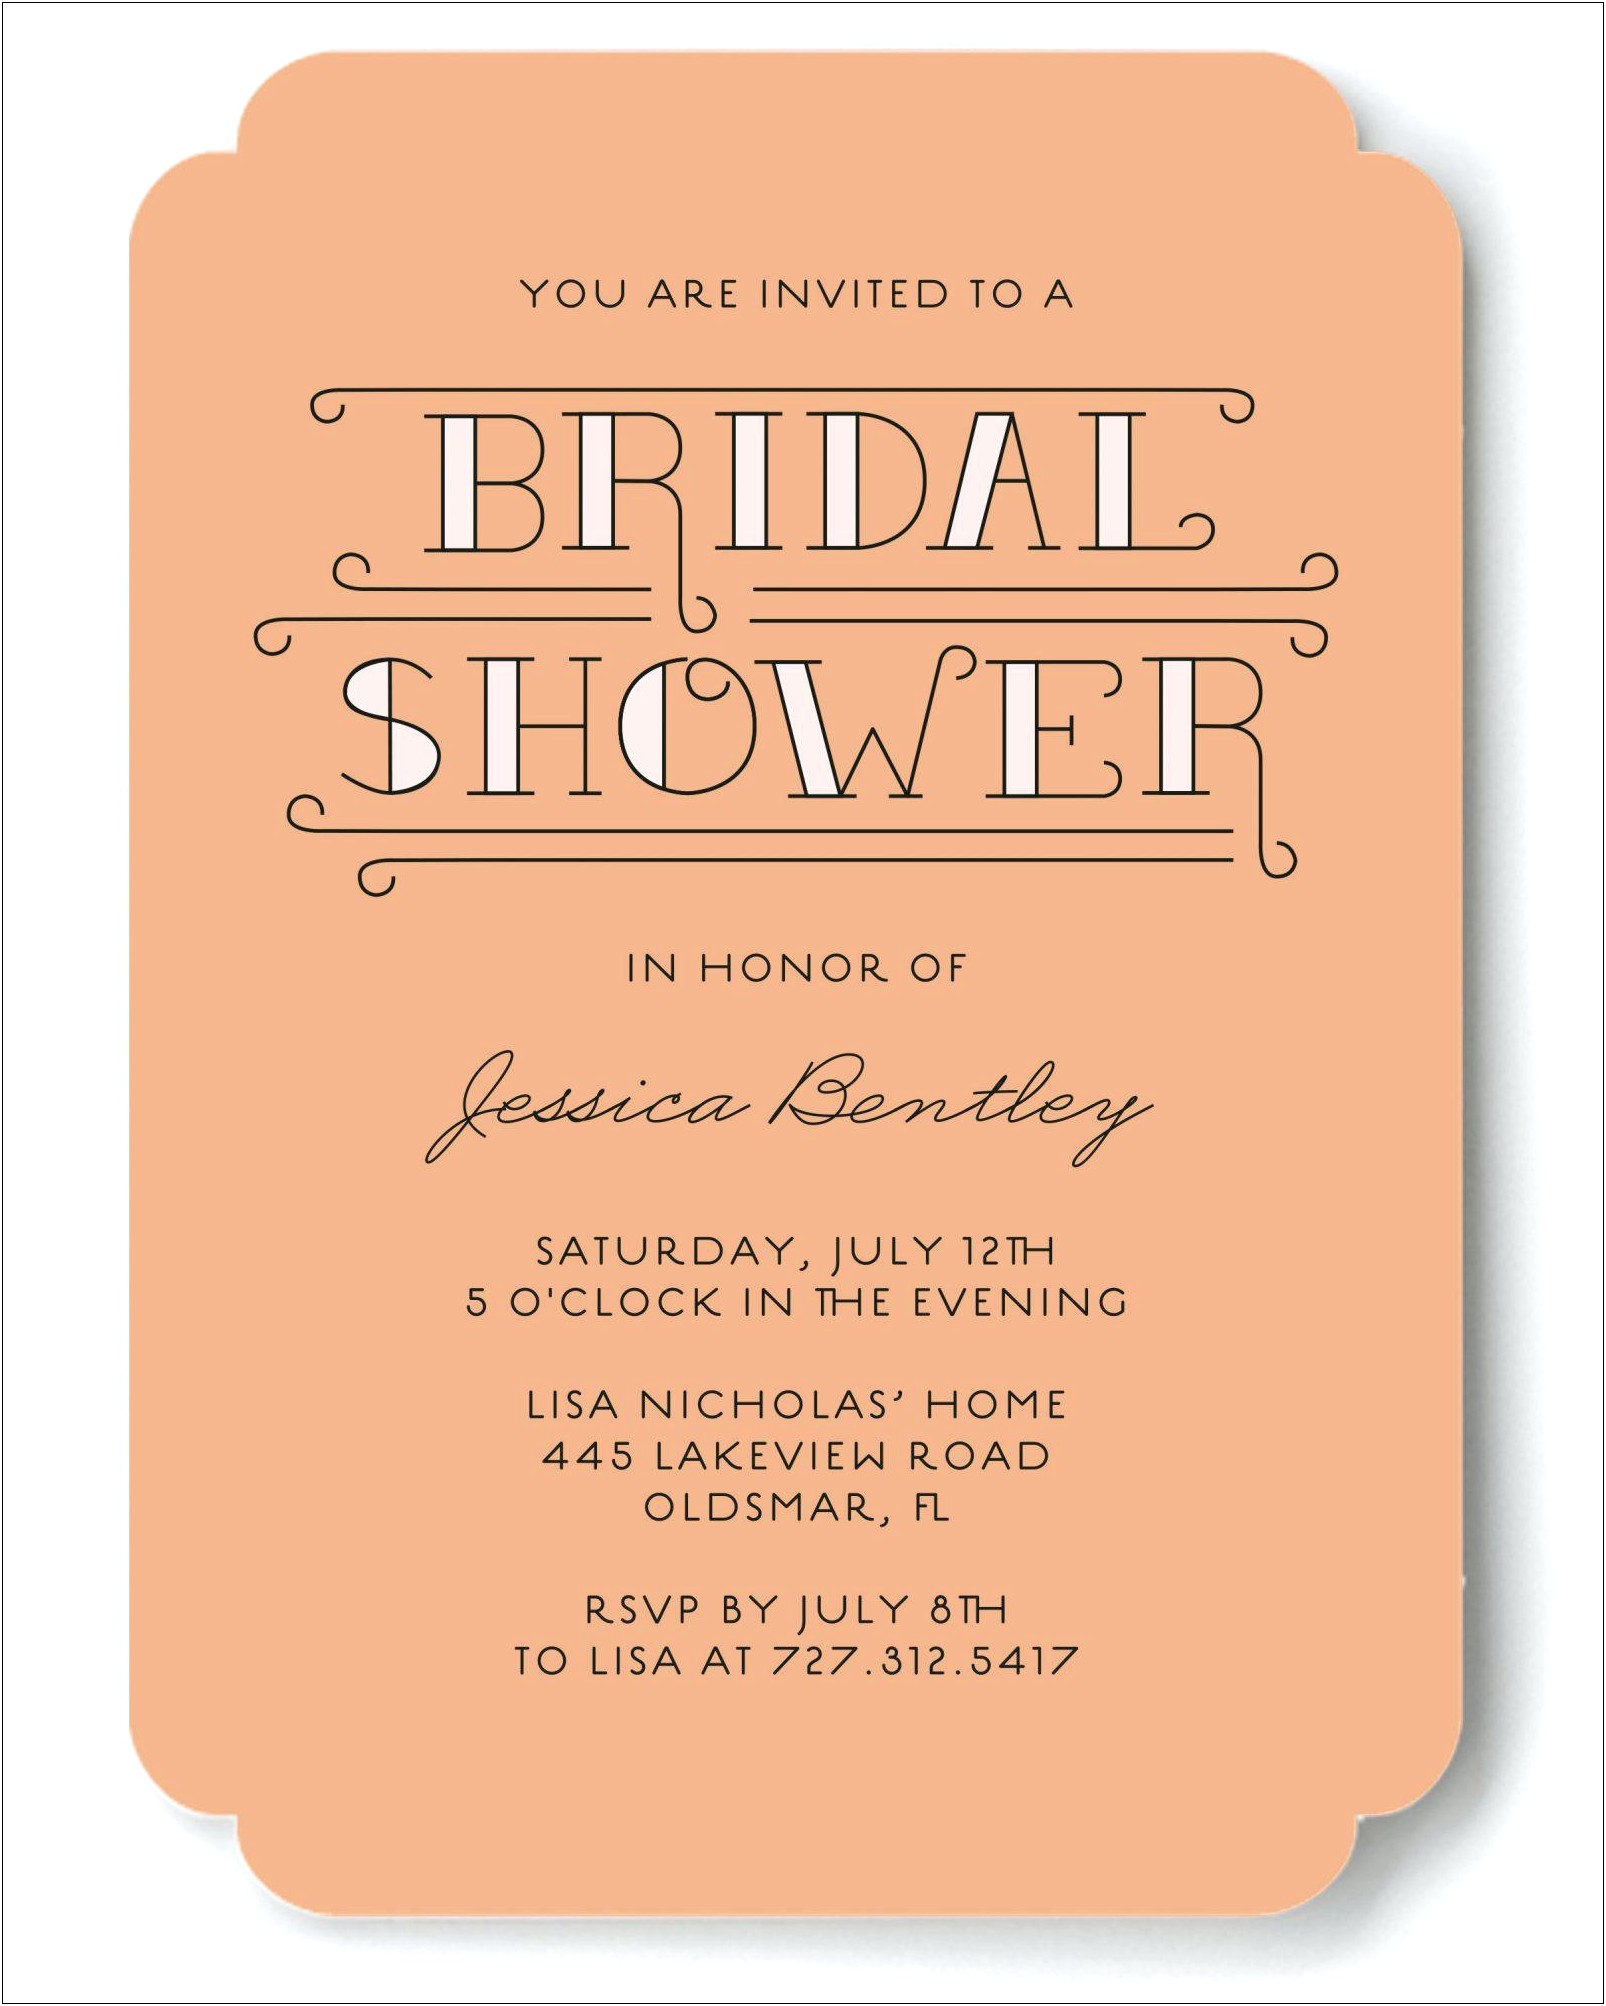 Invited To Bridal Shower And Not Wedding